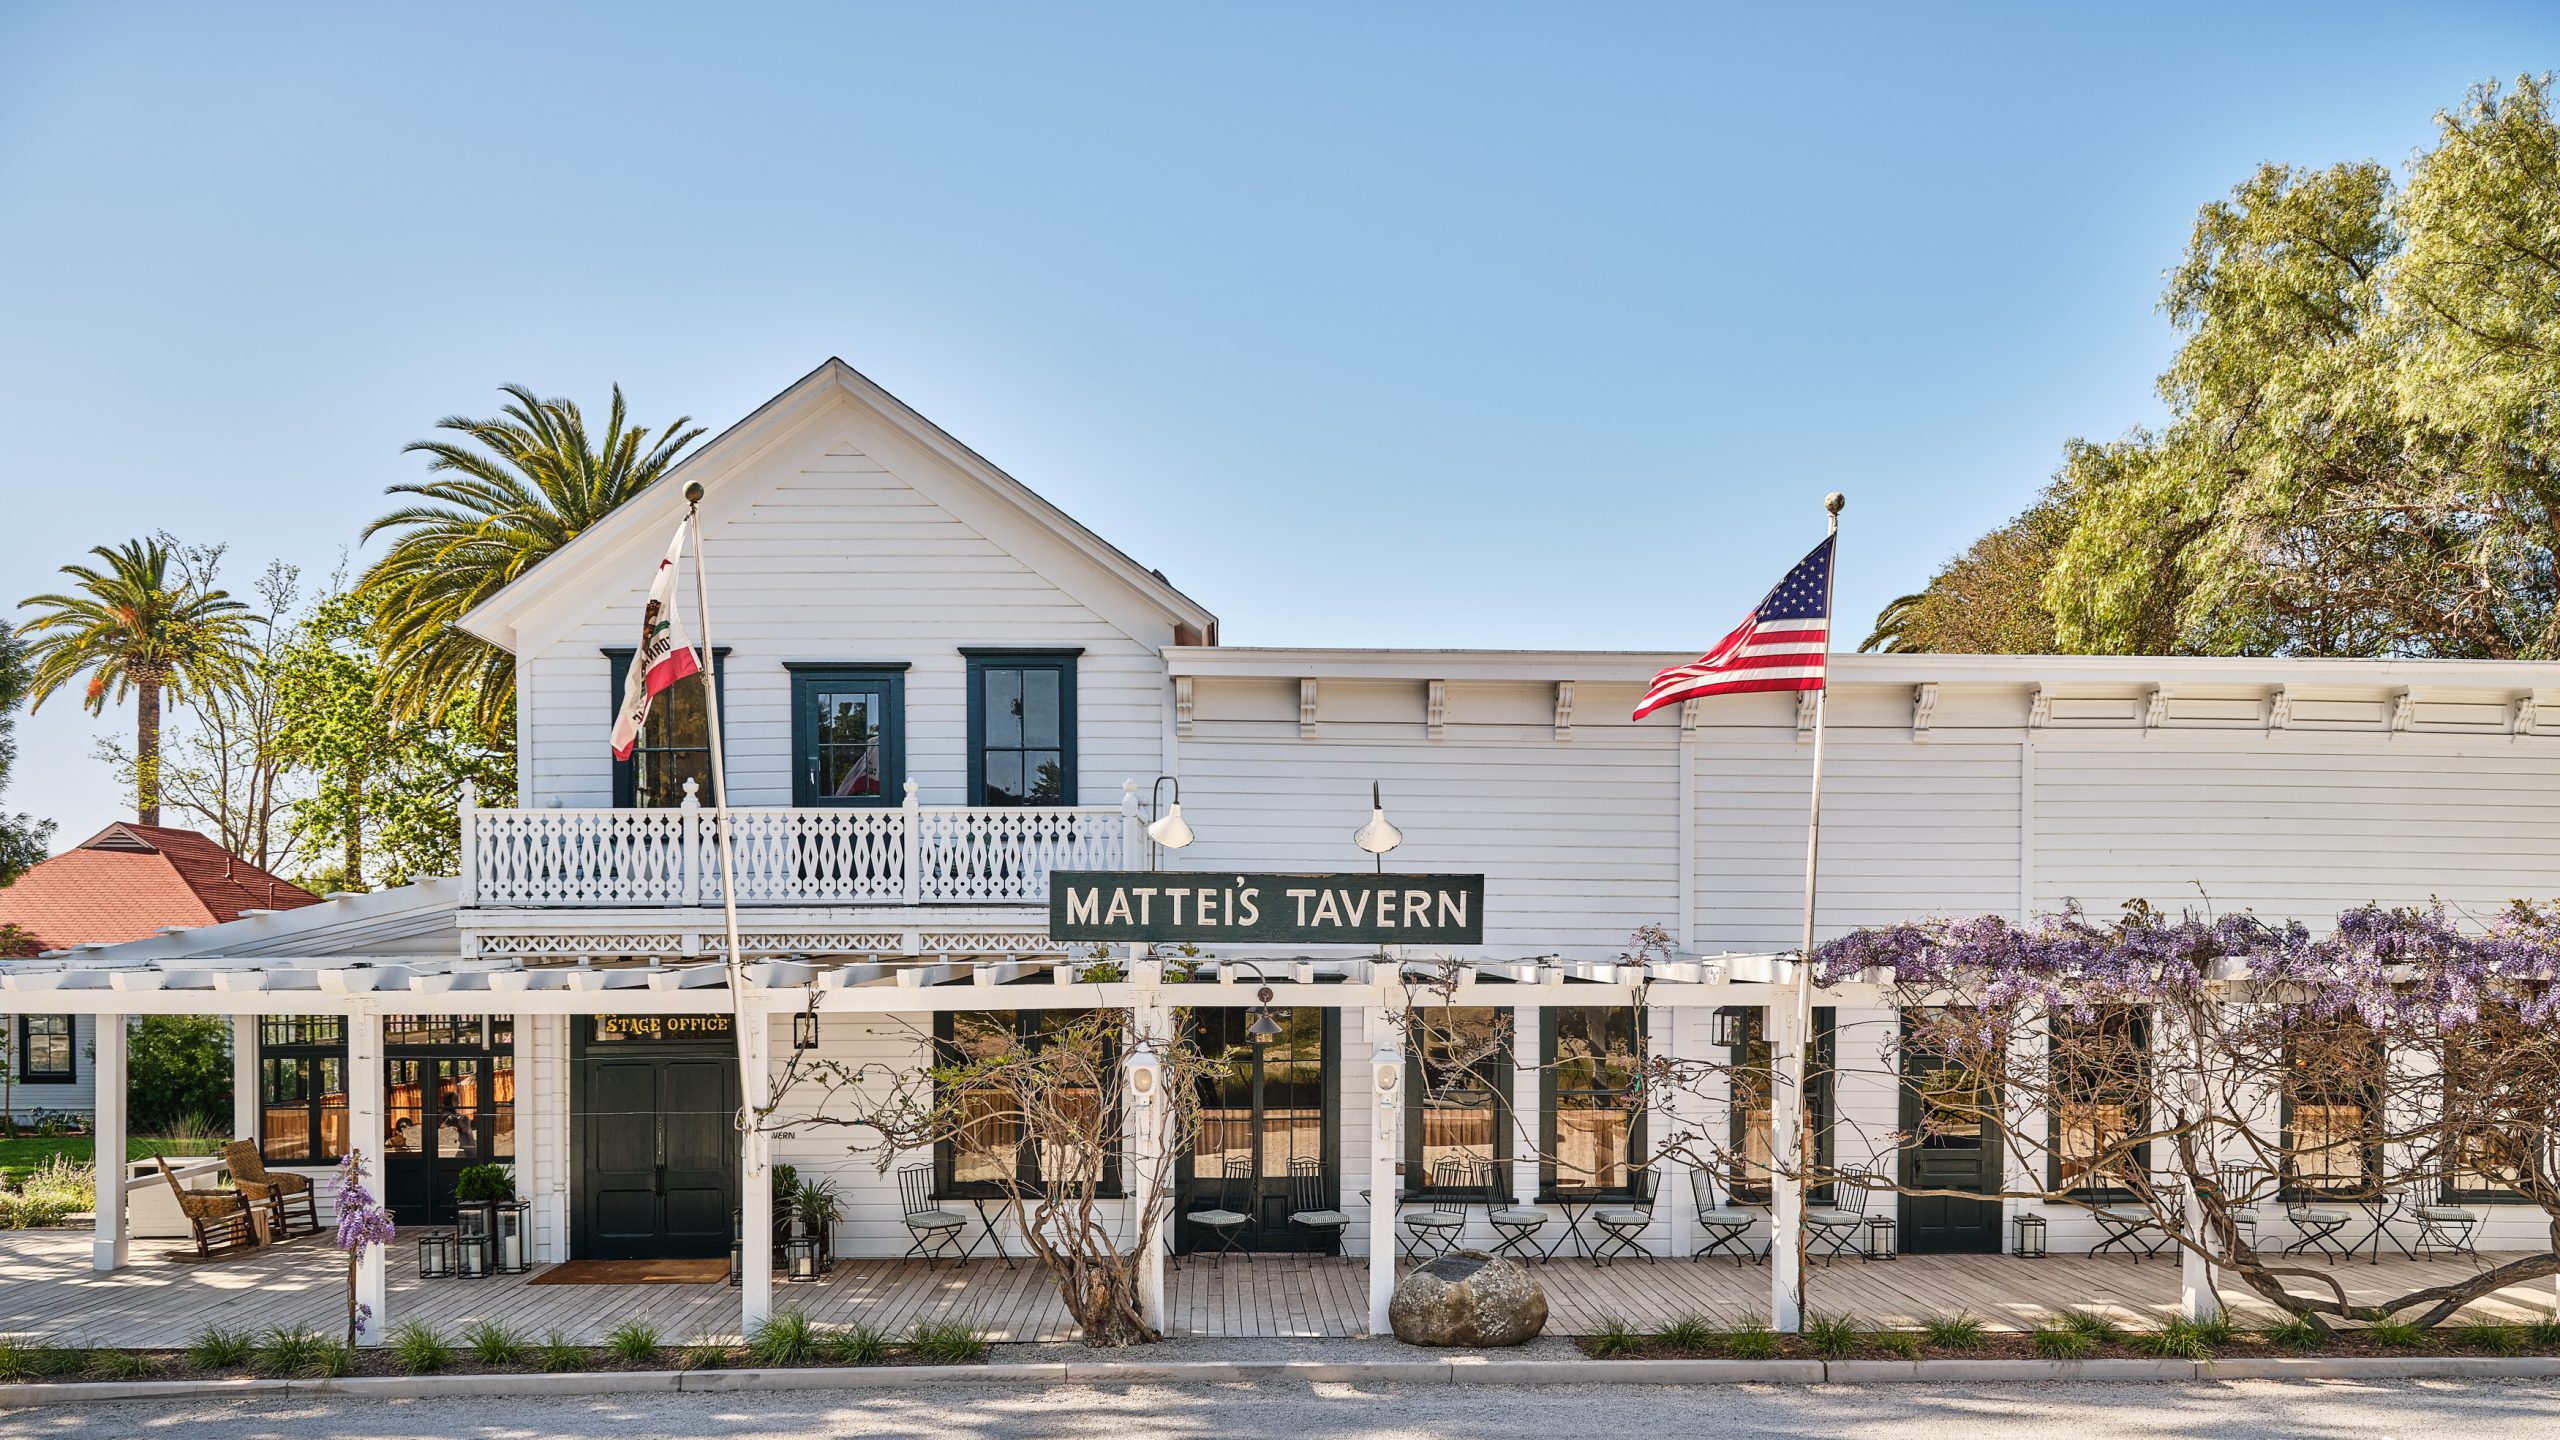 Mercedes-Benz Classic and The Inn at Mattei’s Tavern, Auberge Resorts Collection